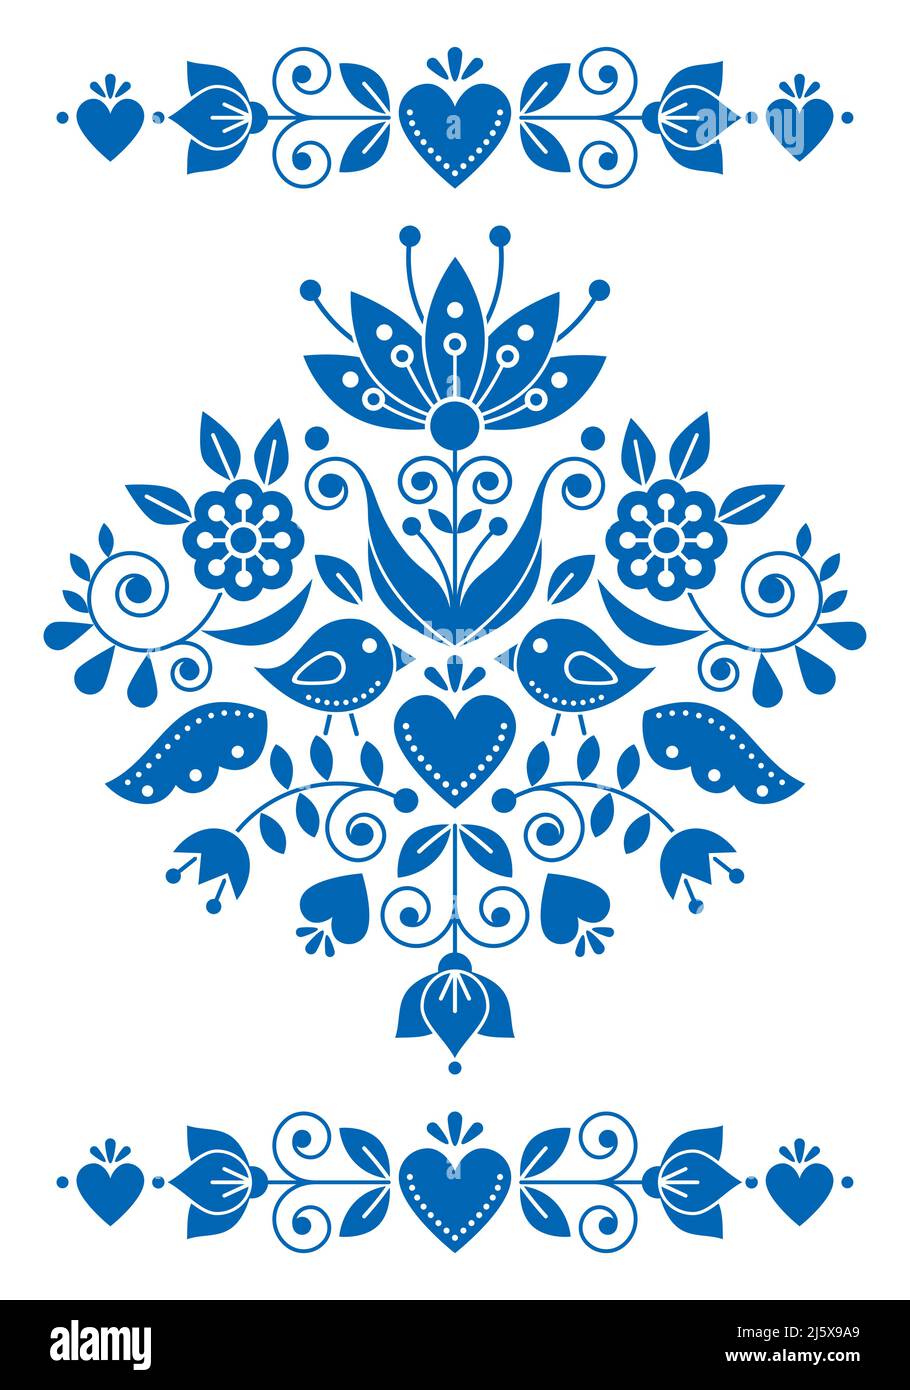 Swedish folk art vector greeting card or invitation design with birds and floral motif, navy blue pattern inspired by the traditional Scandinavian art Stock Vector